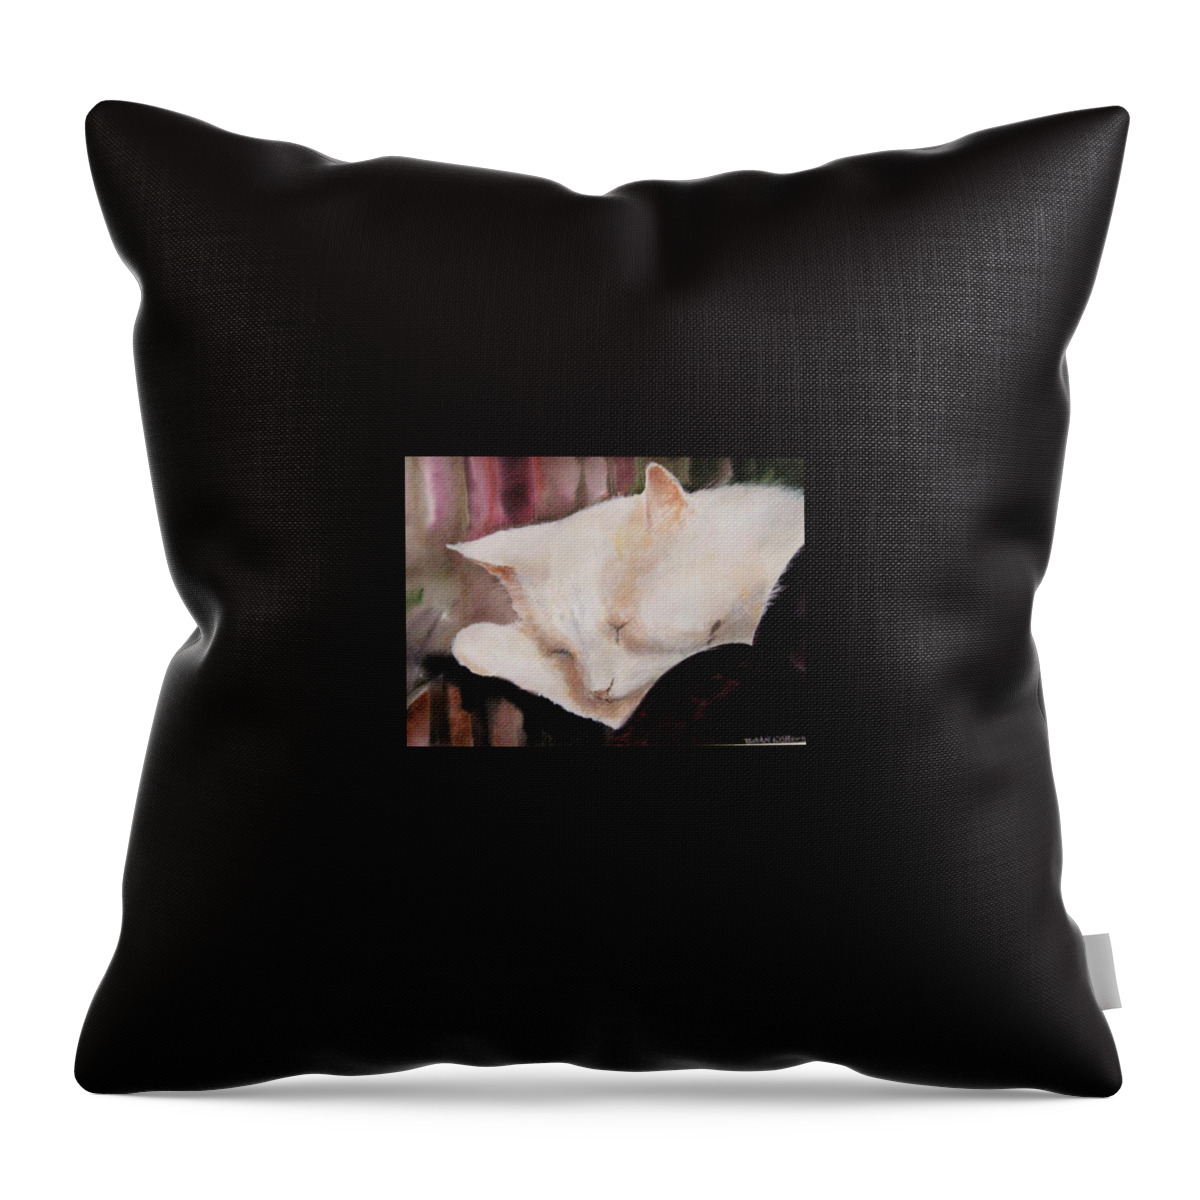  Throw Pillow featuring the painting Kitty by Bobby Walters